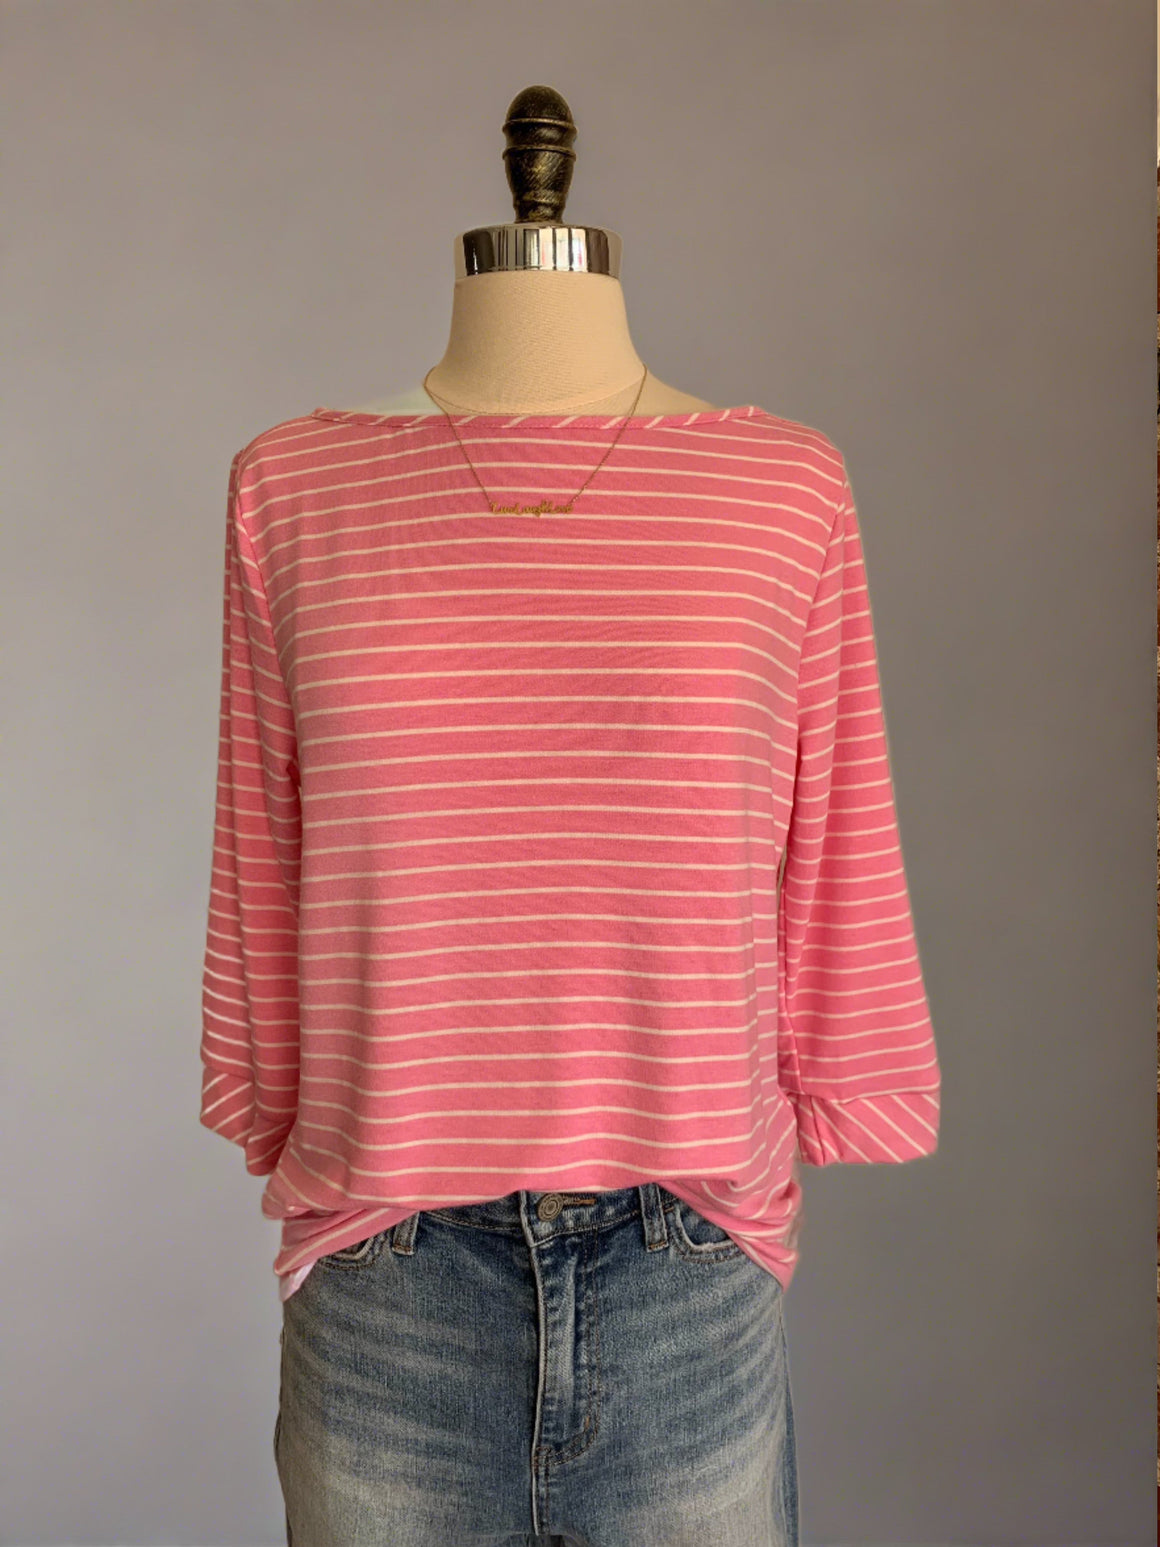 Callie Classic Striped Three Quarter Length Top - Hot Pink-Top-Carolyn Jane's Jewelry